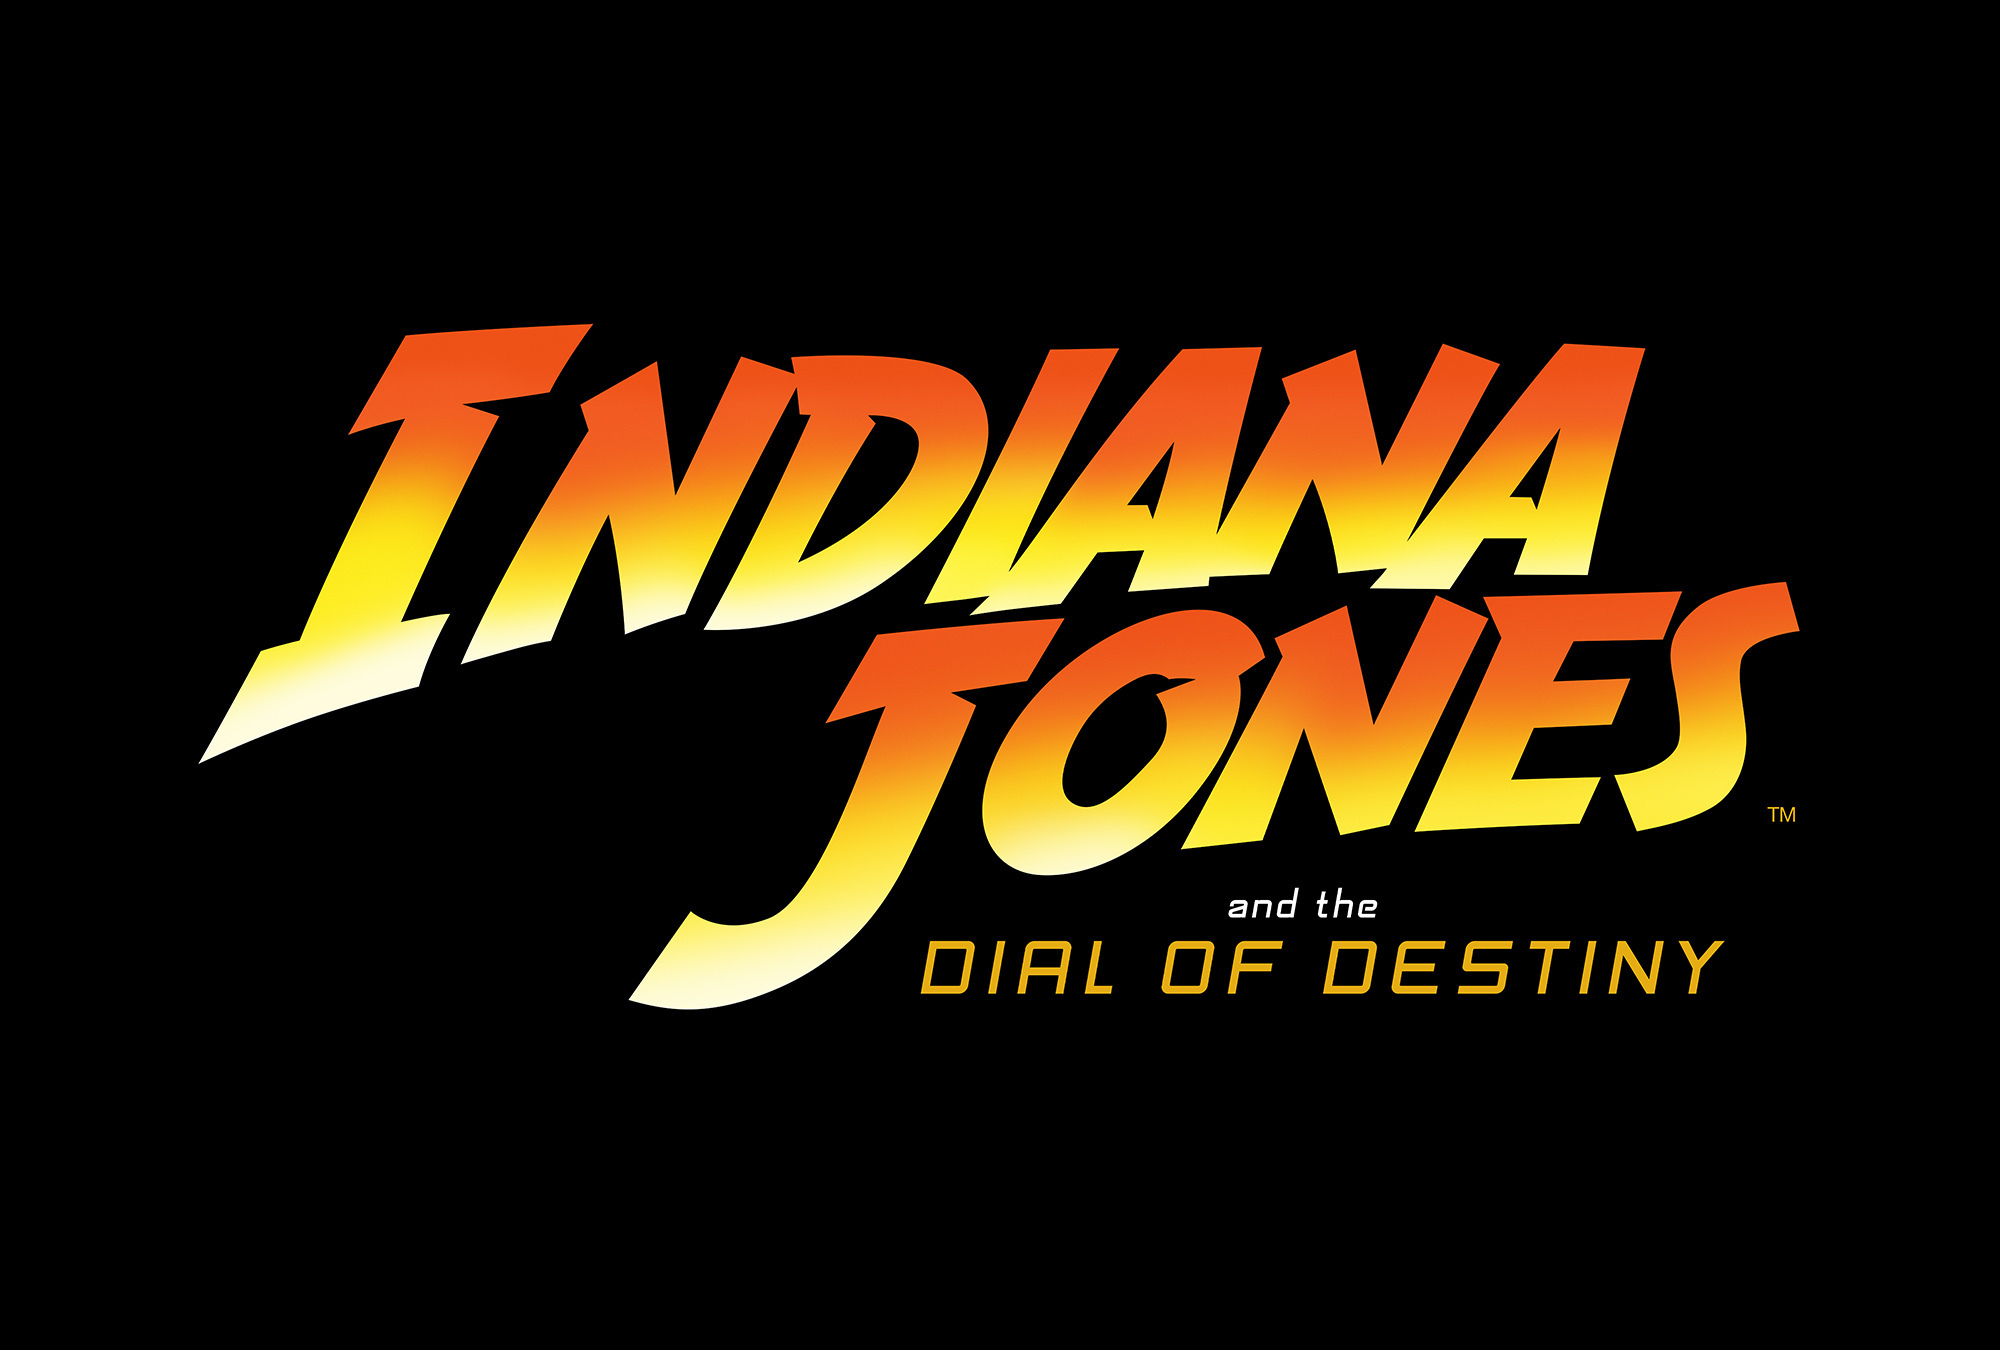 HD desktop wallpaper featuring the logo of 'Indiana Jones and the Dial of Destiny' in bold yellow and red text against a black background.